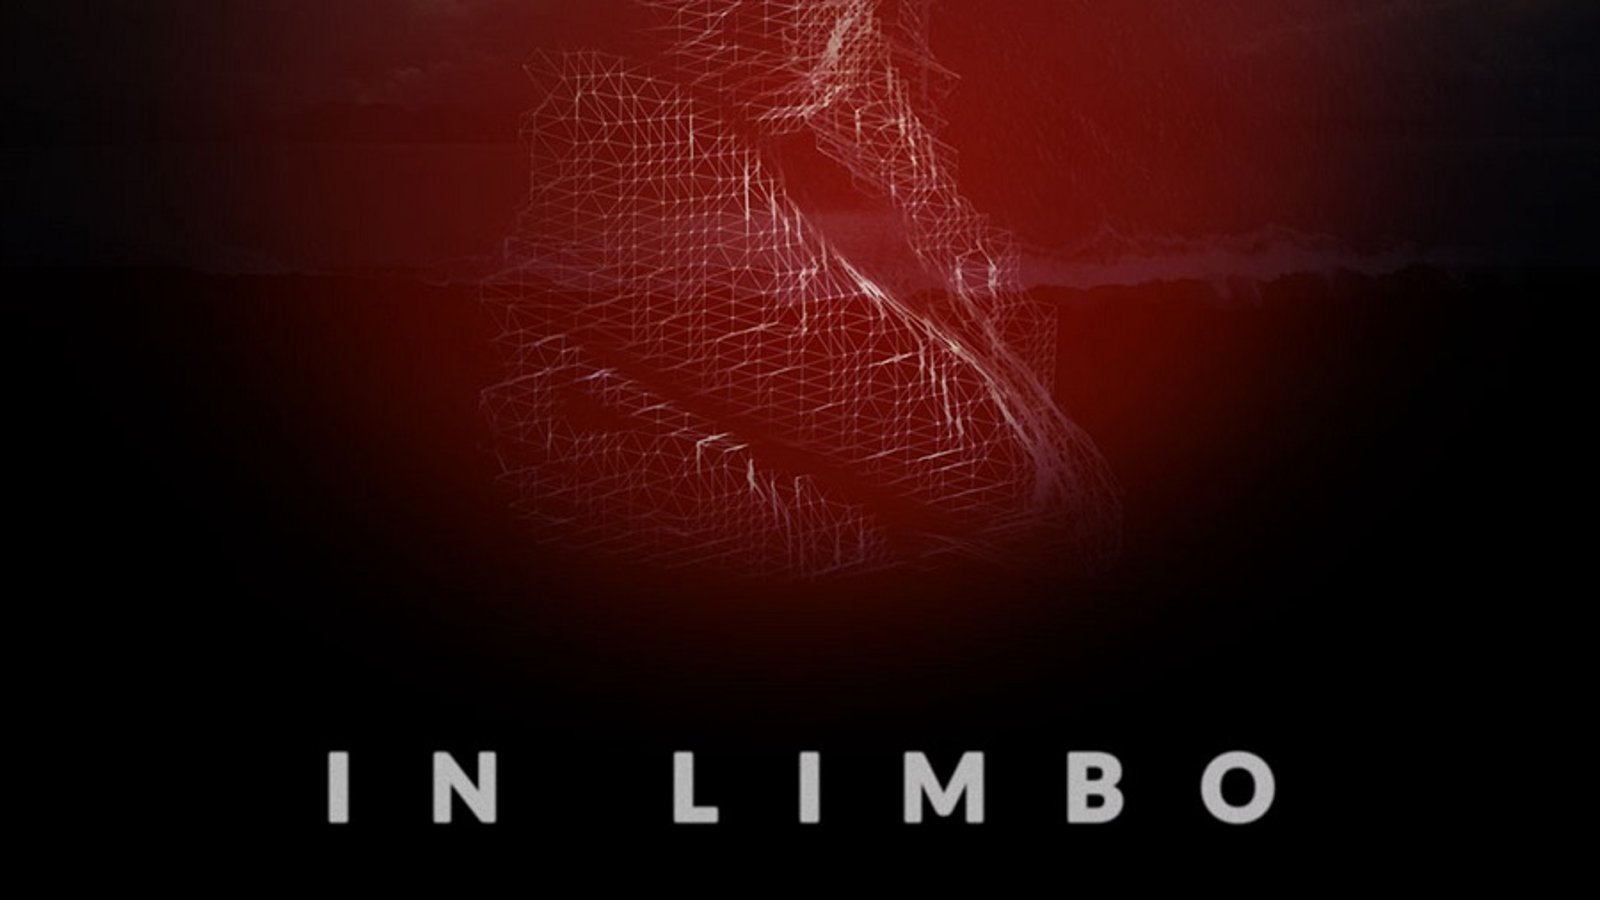 In Limbo - A Mediation on Time, Memory, and Technology.